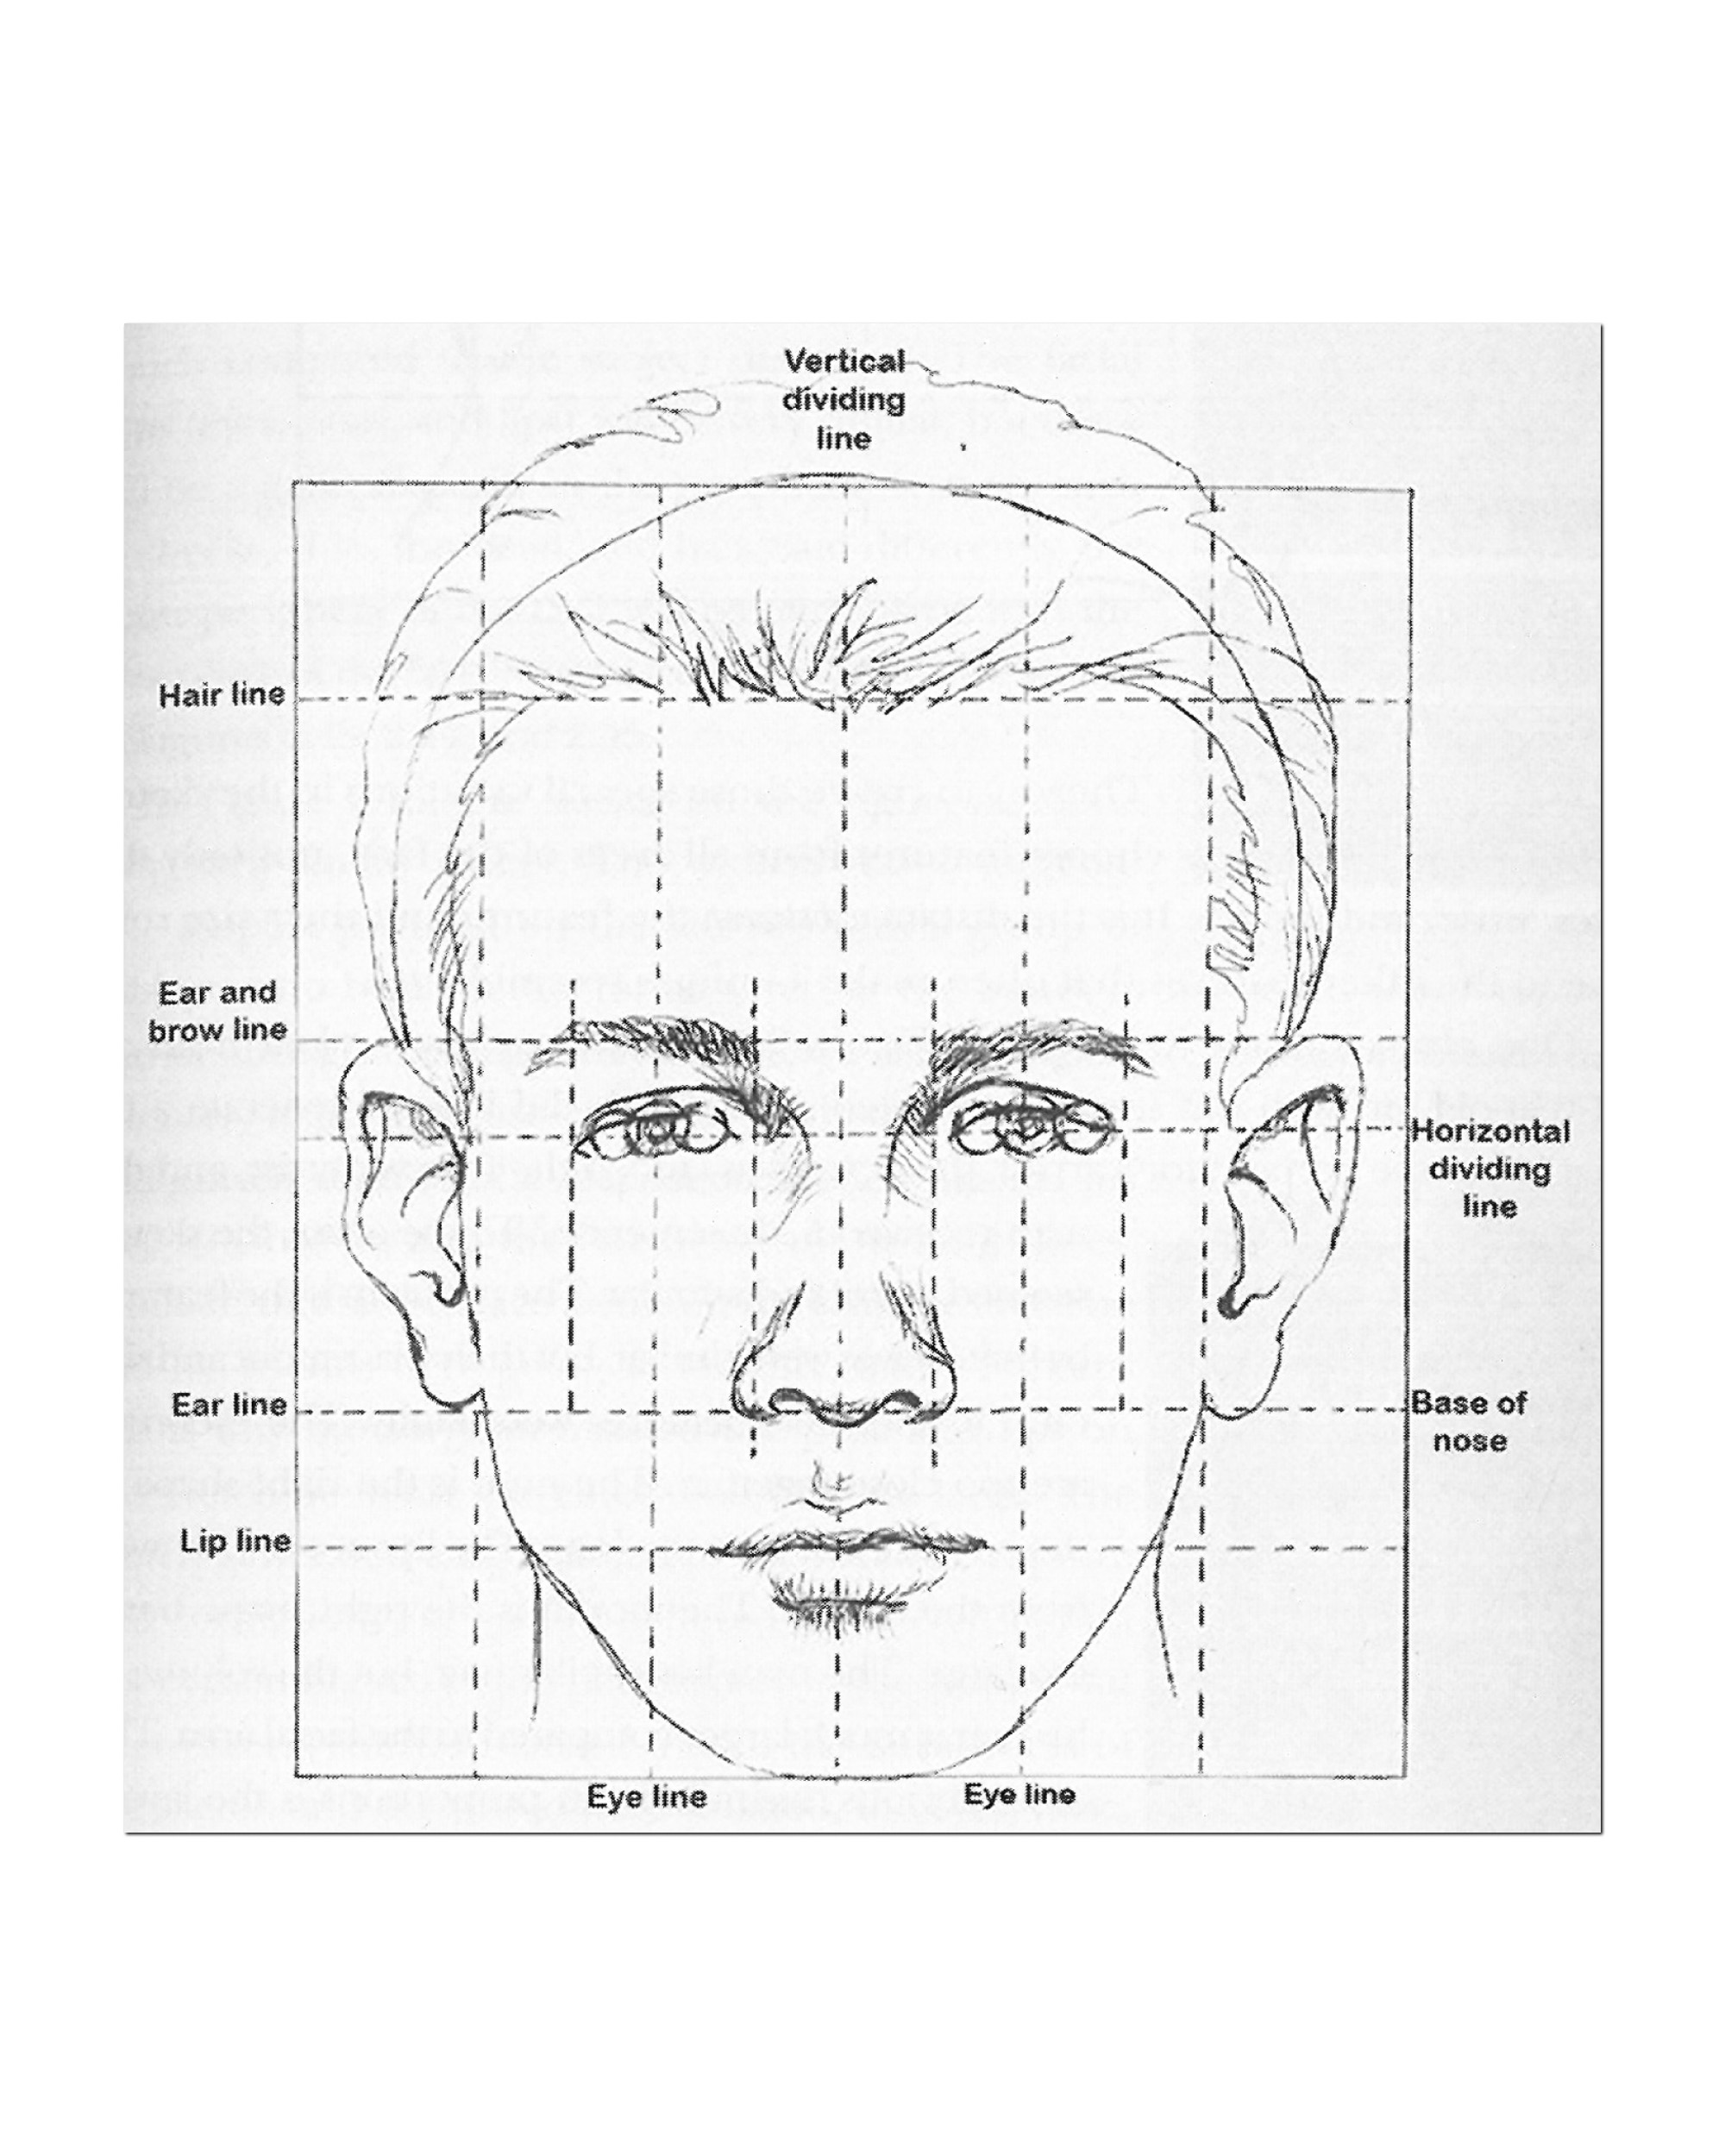 Facial proportion template. Image courtesy of Lois Gibson.